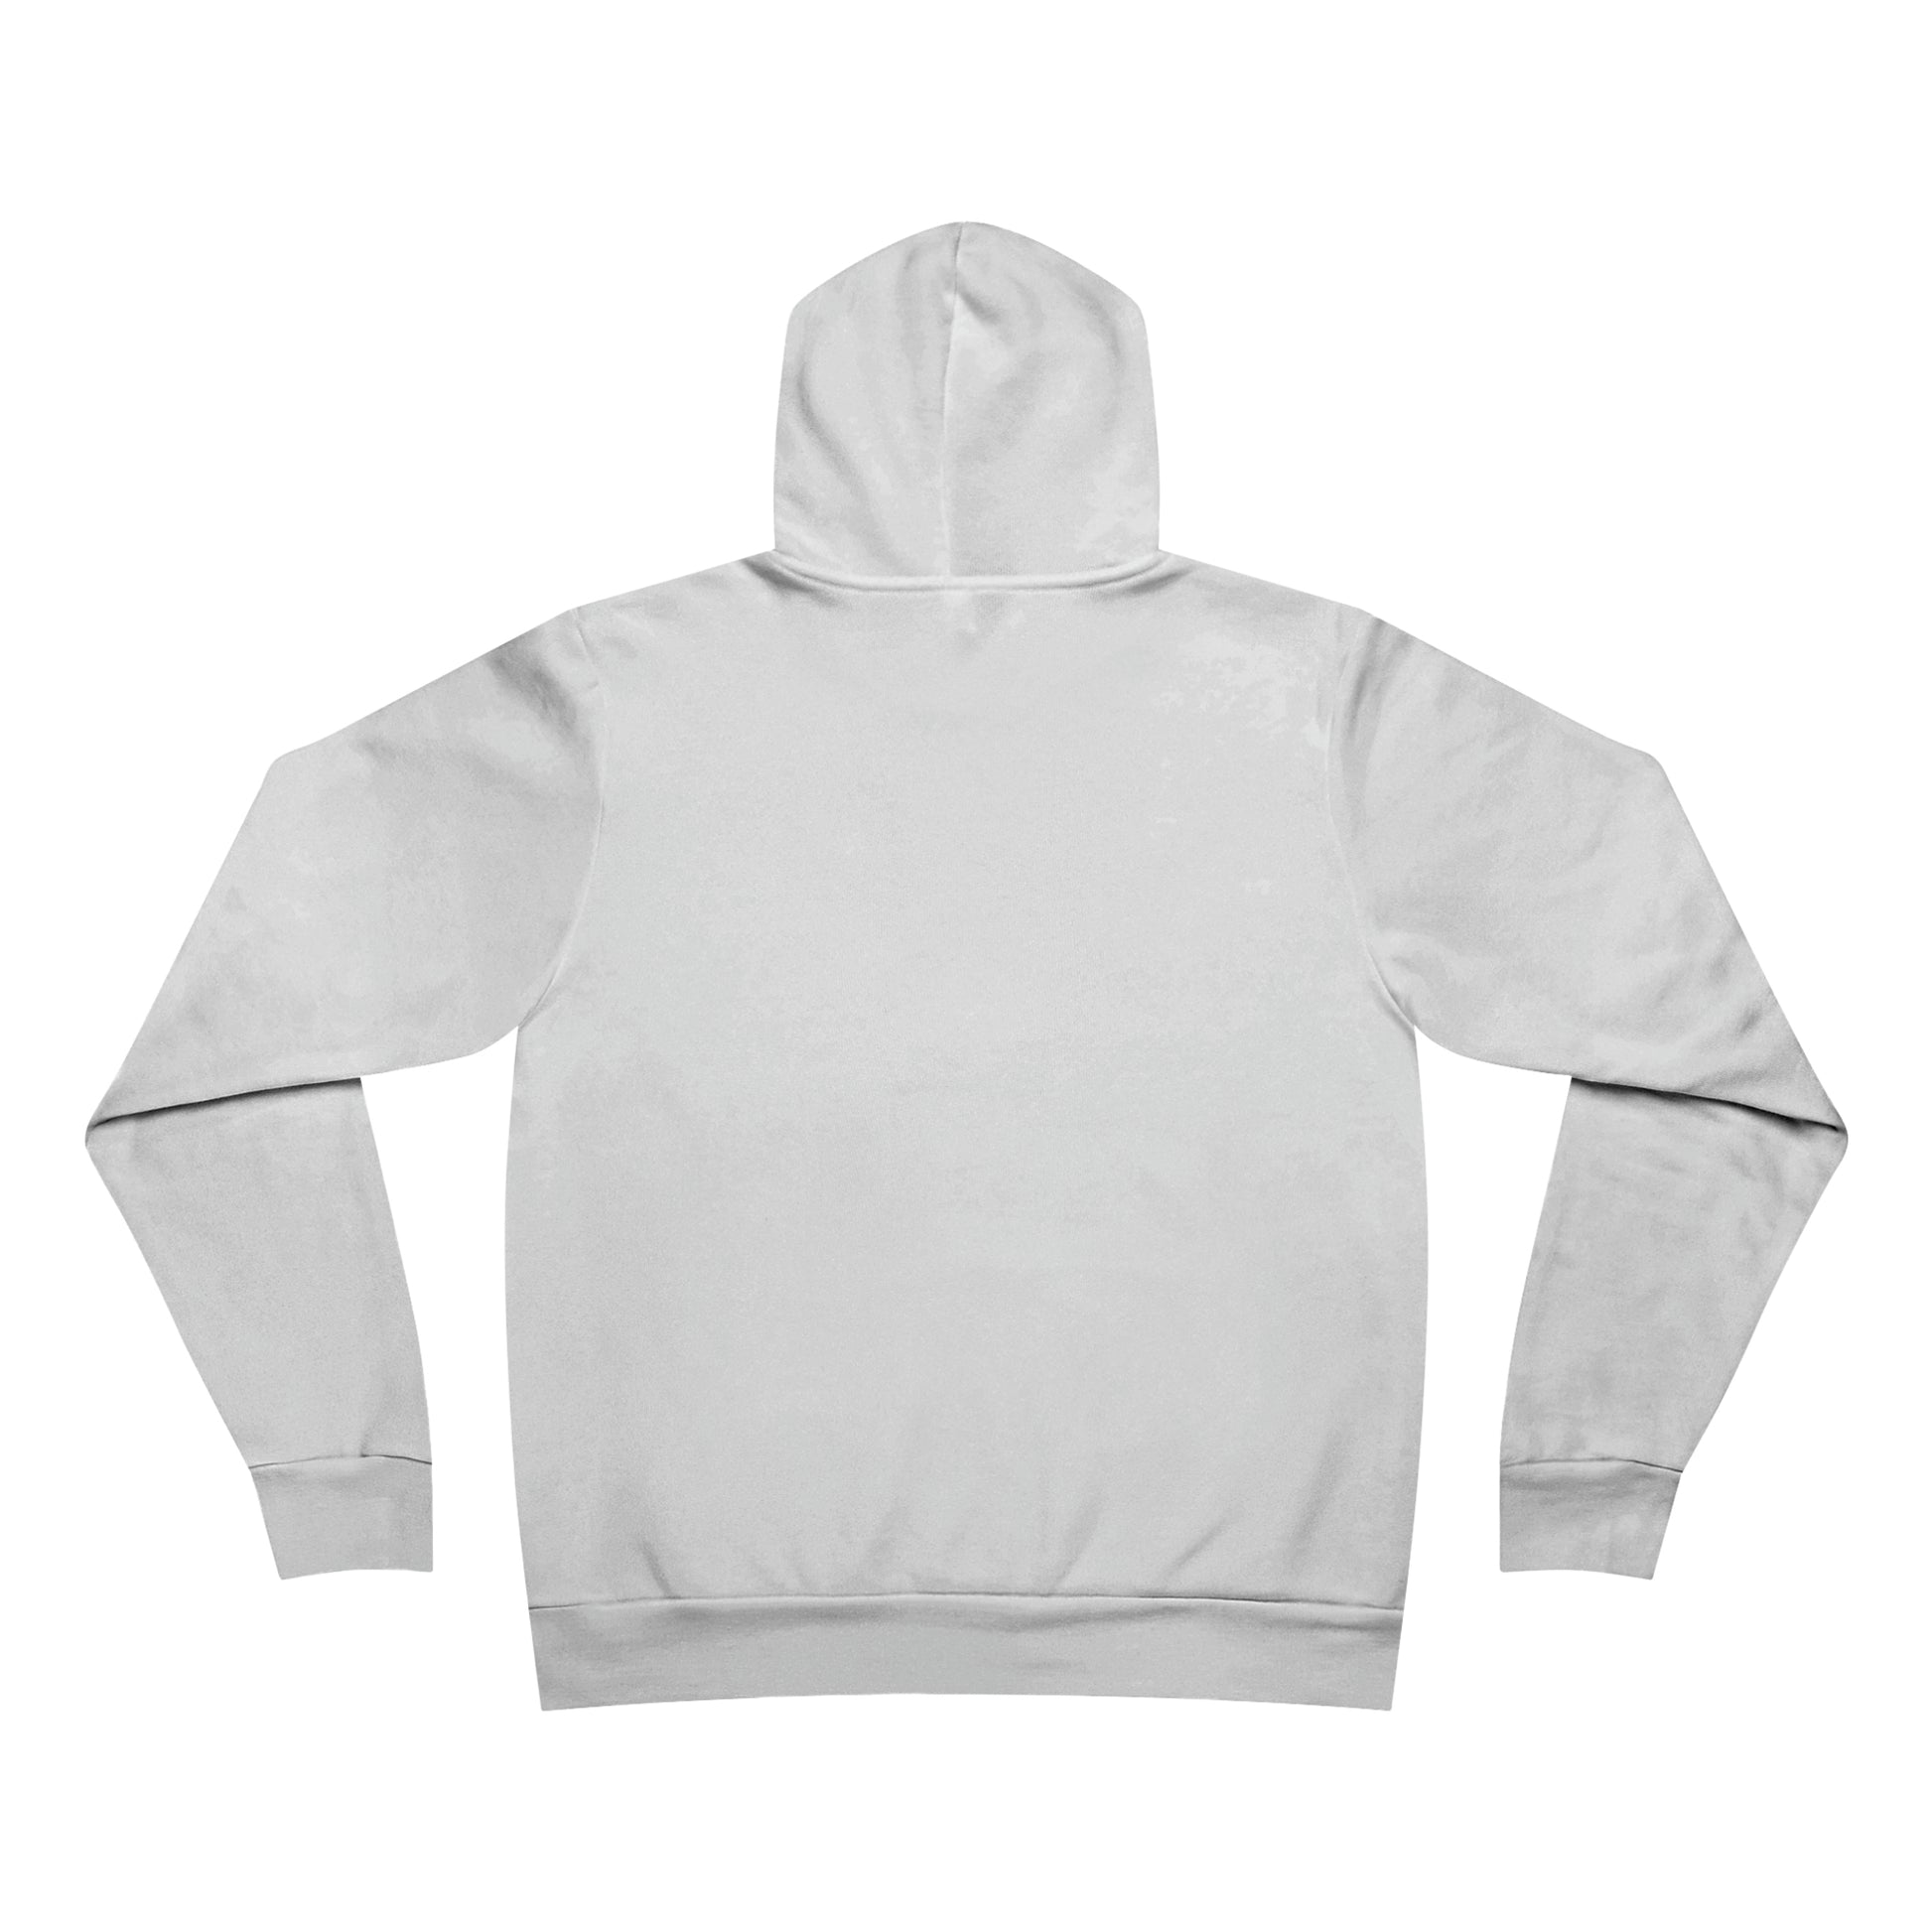 Awesome Teapot Dome Service Station - Unisex Sponge Fleece Pullover Hoodie - Fry1Productions